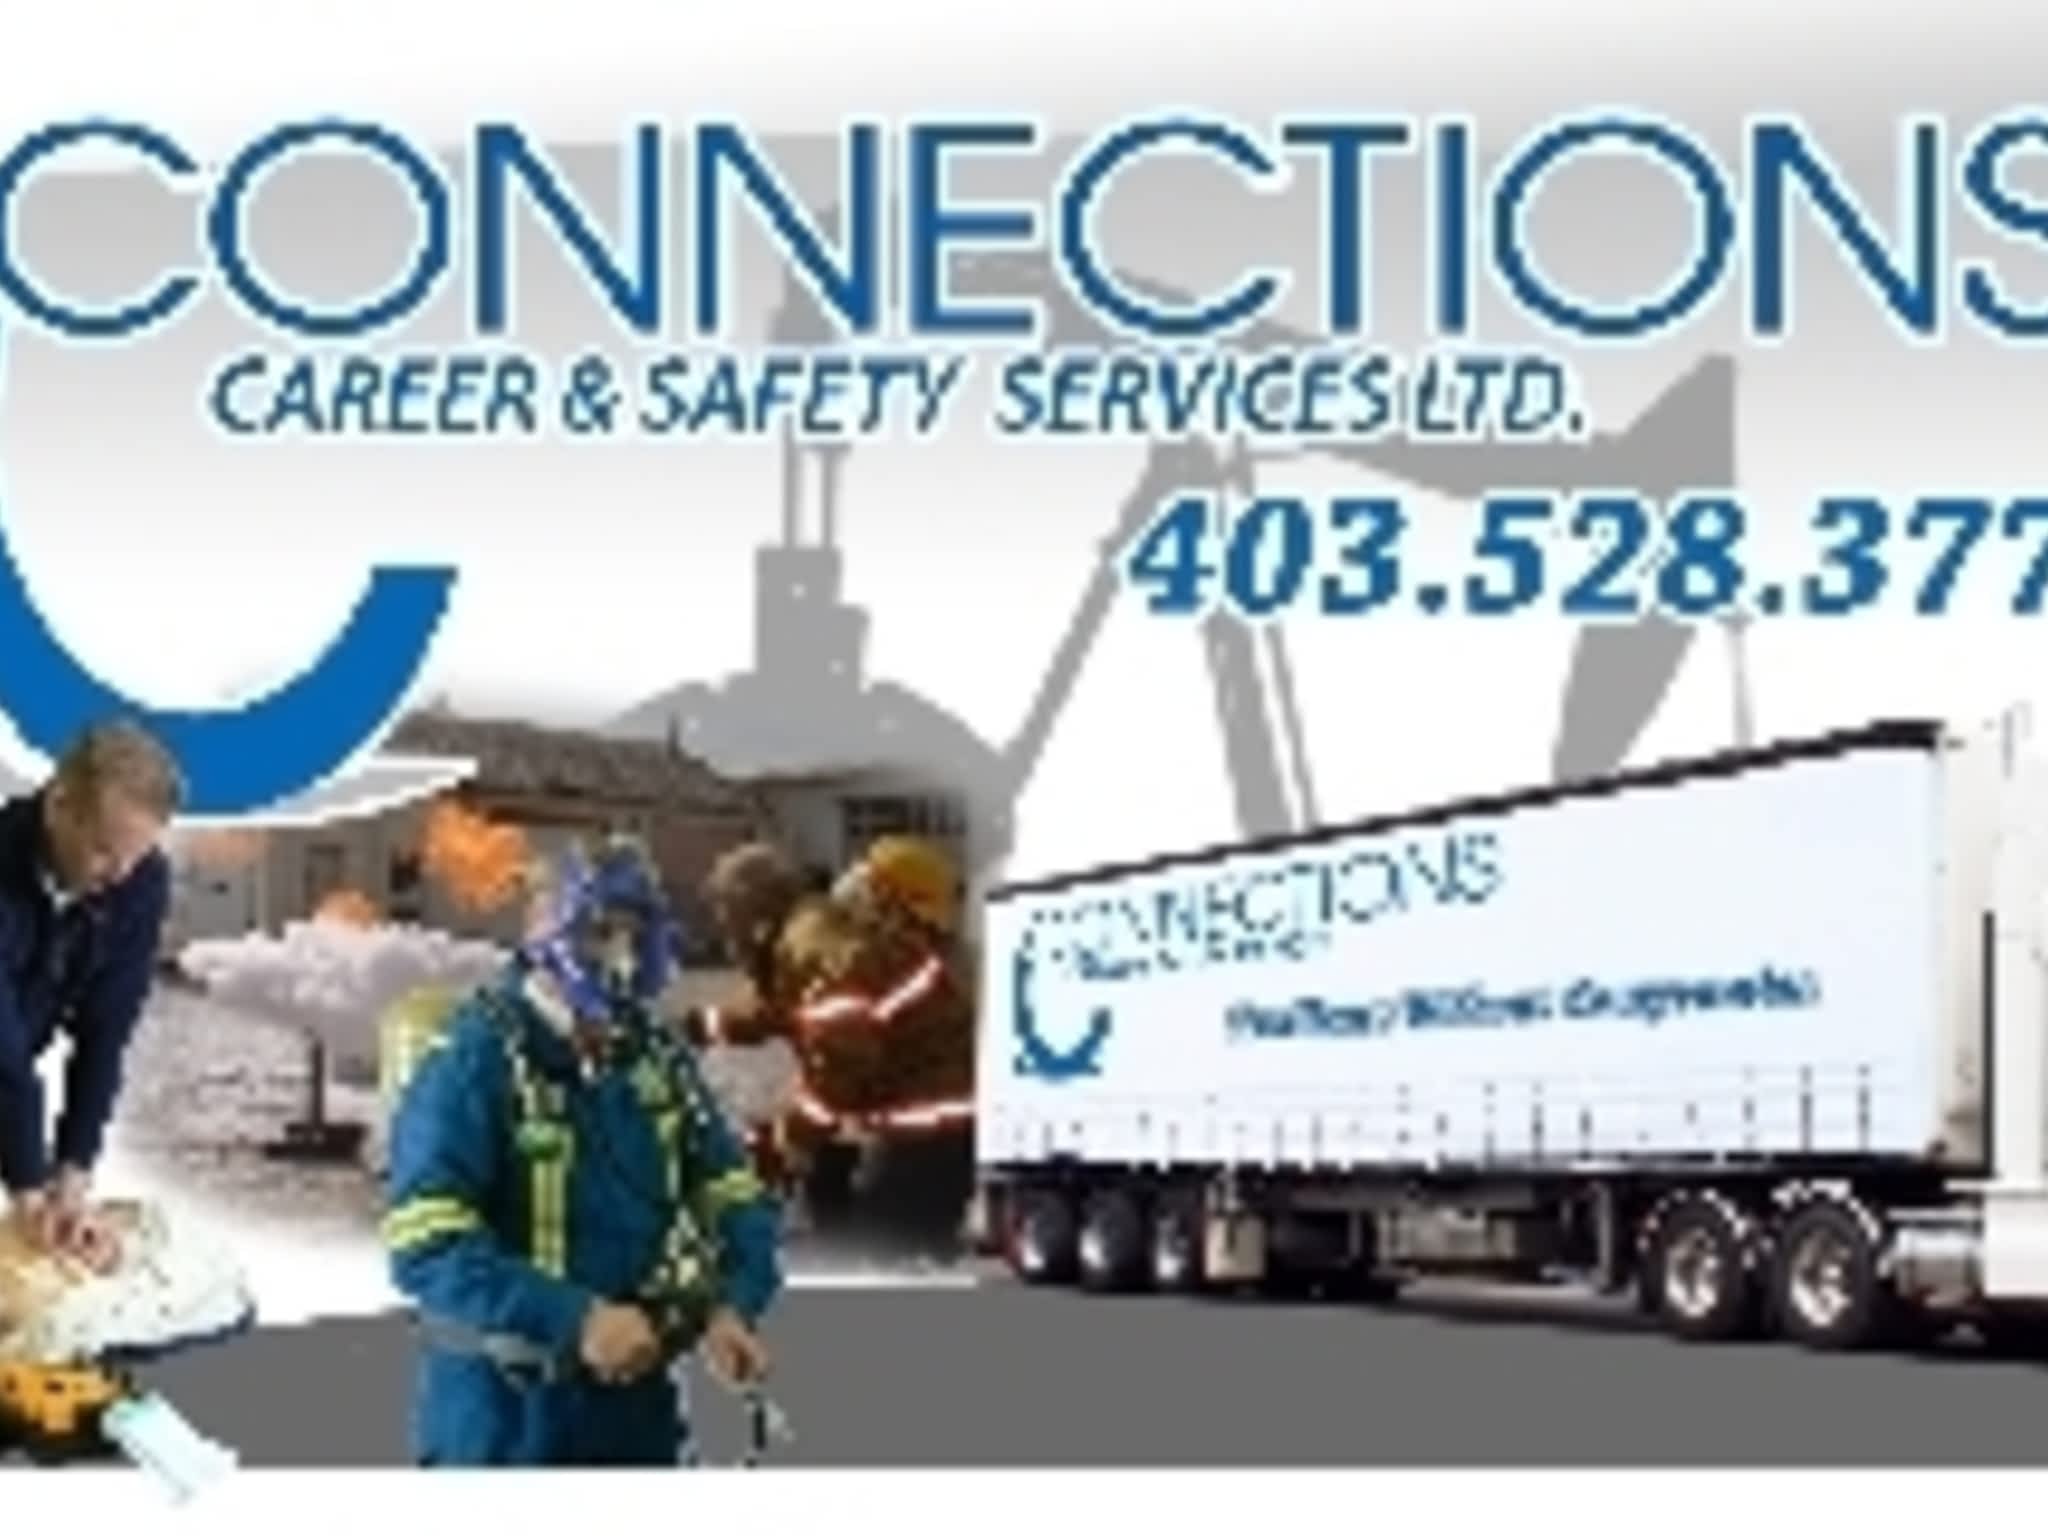 photo Connections Career & Safety Services Ltd